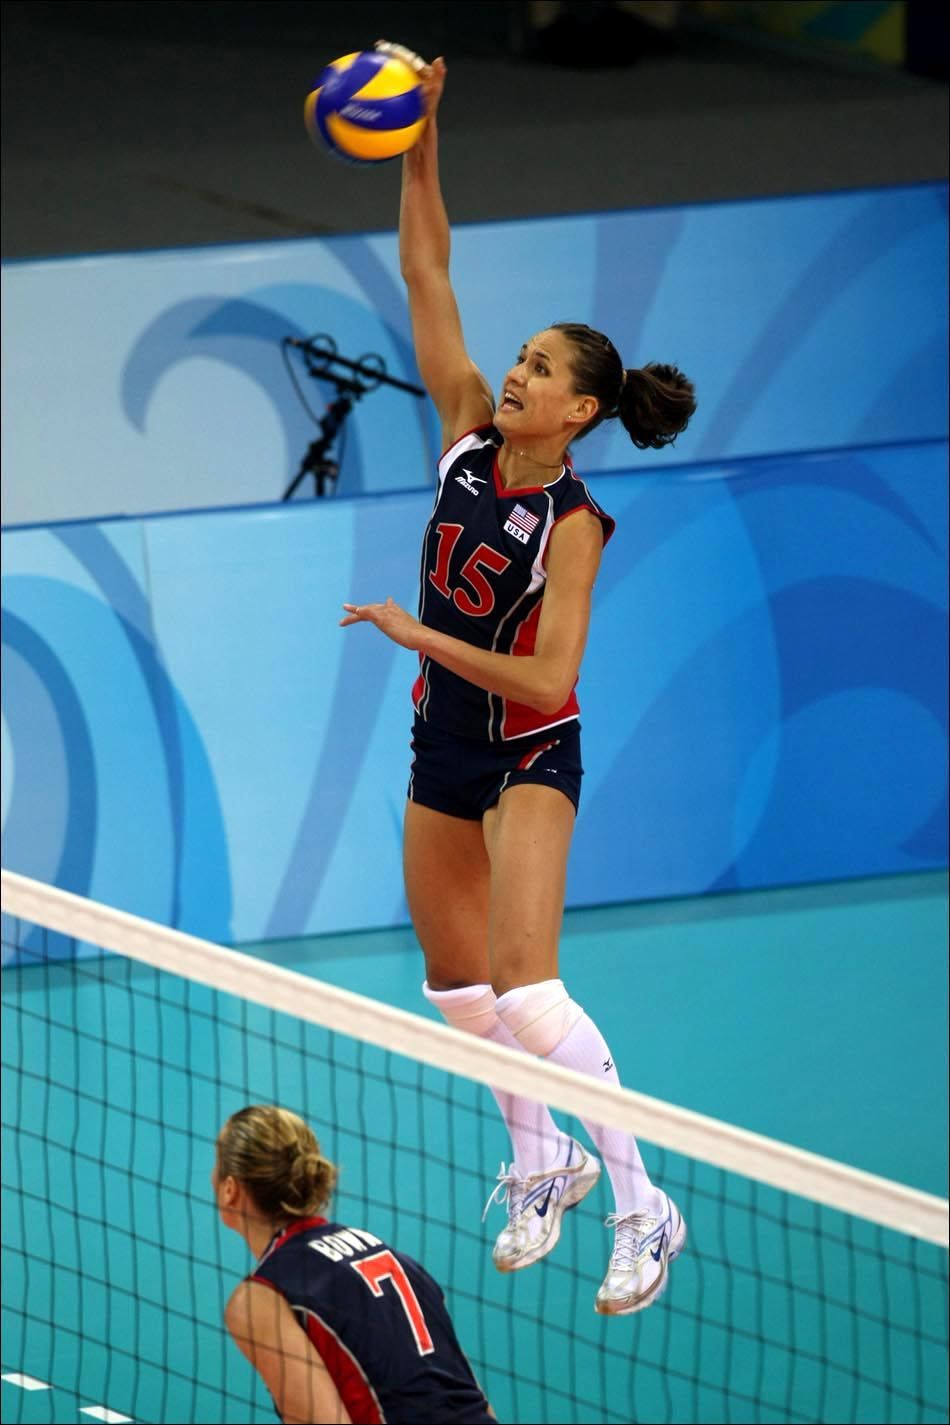 Logan Tom US Olympic Indoor Volleyball Player Her & SO happy to be rooting her on in another olymp. Olympic volleyball, Indoor volleyball, Women volleyball